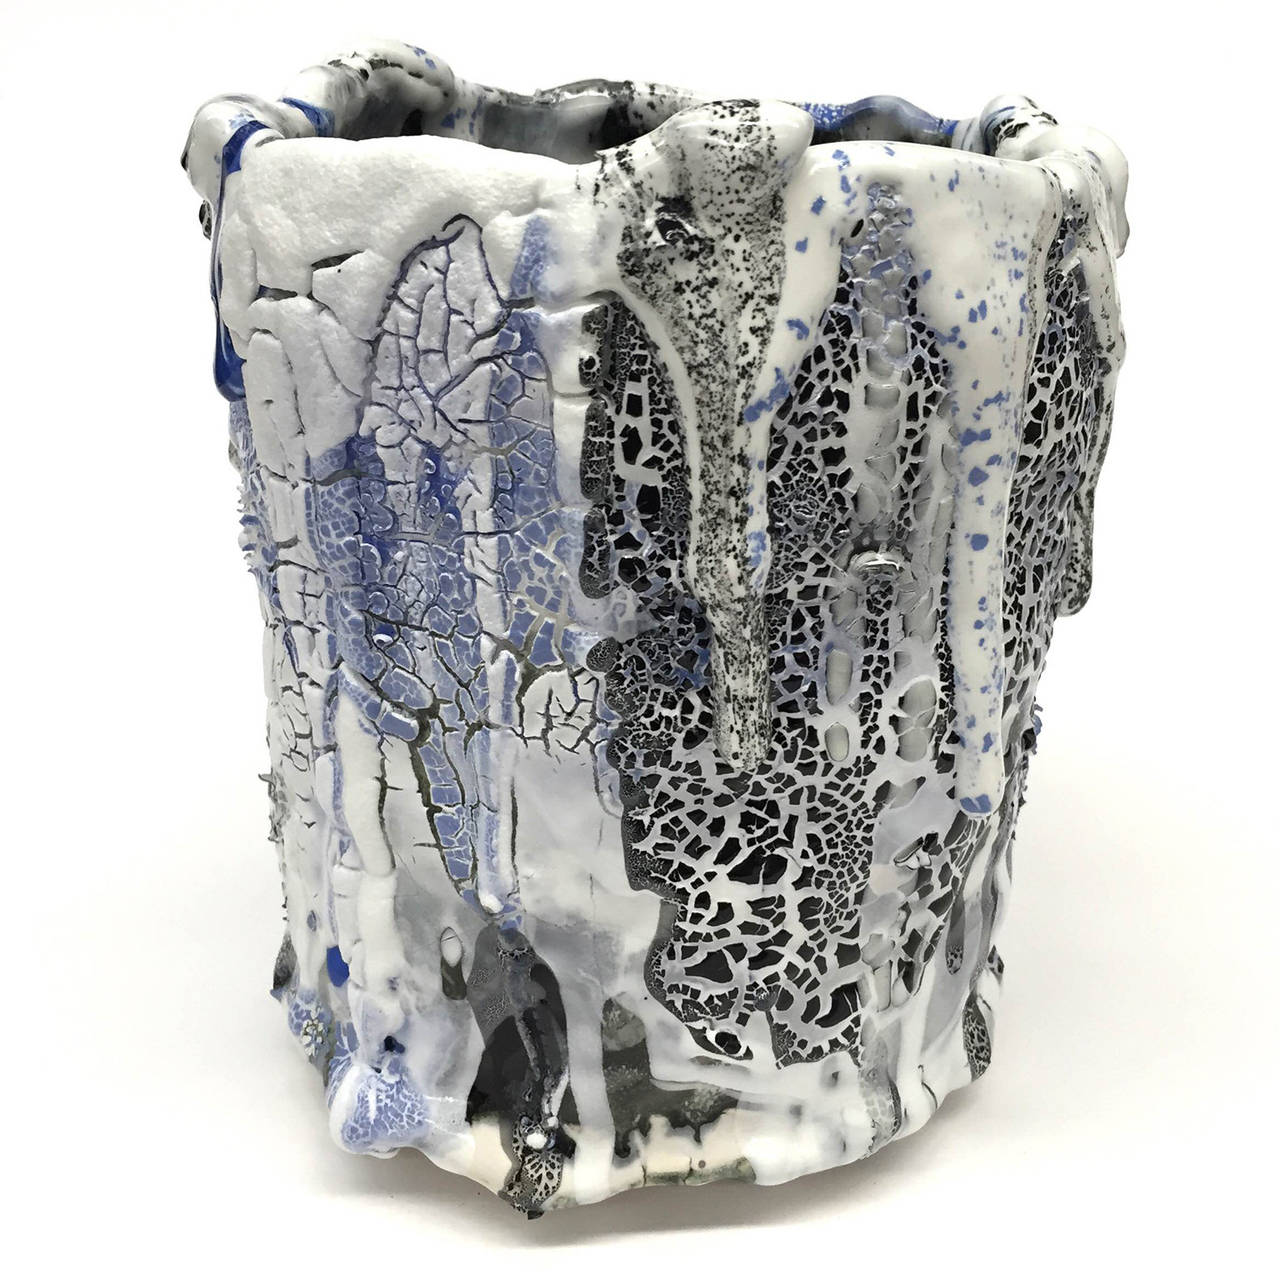 Contemporary ceramic vessel by LA based mixed-media sculptor Brian Rochefort for Kelly Behun Studio. Highly textured and worked surface resulting from multiple firings. Multicolored glazes including cobalt, black and white. Watertight, may be used